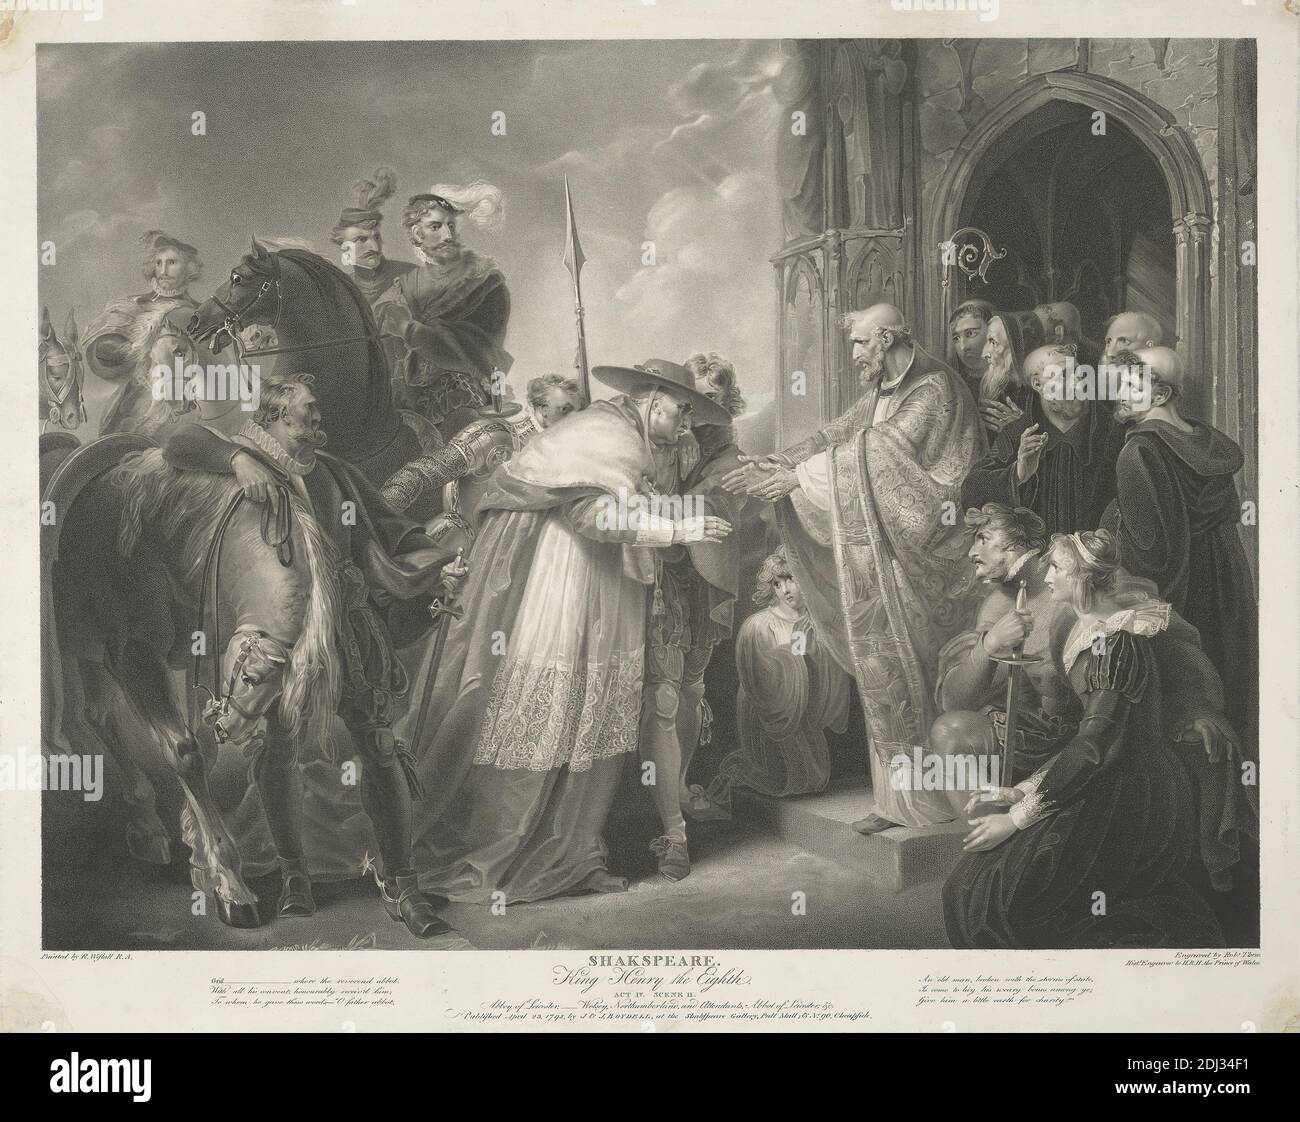 King Henry the Eighth: Act IV Scene II: Abbey of Leicester. Wolsey, Northumberland, and Attendants, Abbot of Leicester, etc., Robert Thew, 1758–1802, British, after Richard Westall, 1765–1836, British, 1798, Engraving, Sheet: 17 7/16 x 23 1/2in. (44.3 x 59.7cm Stock Photo